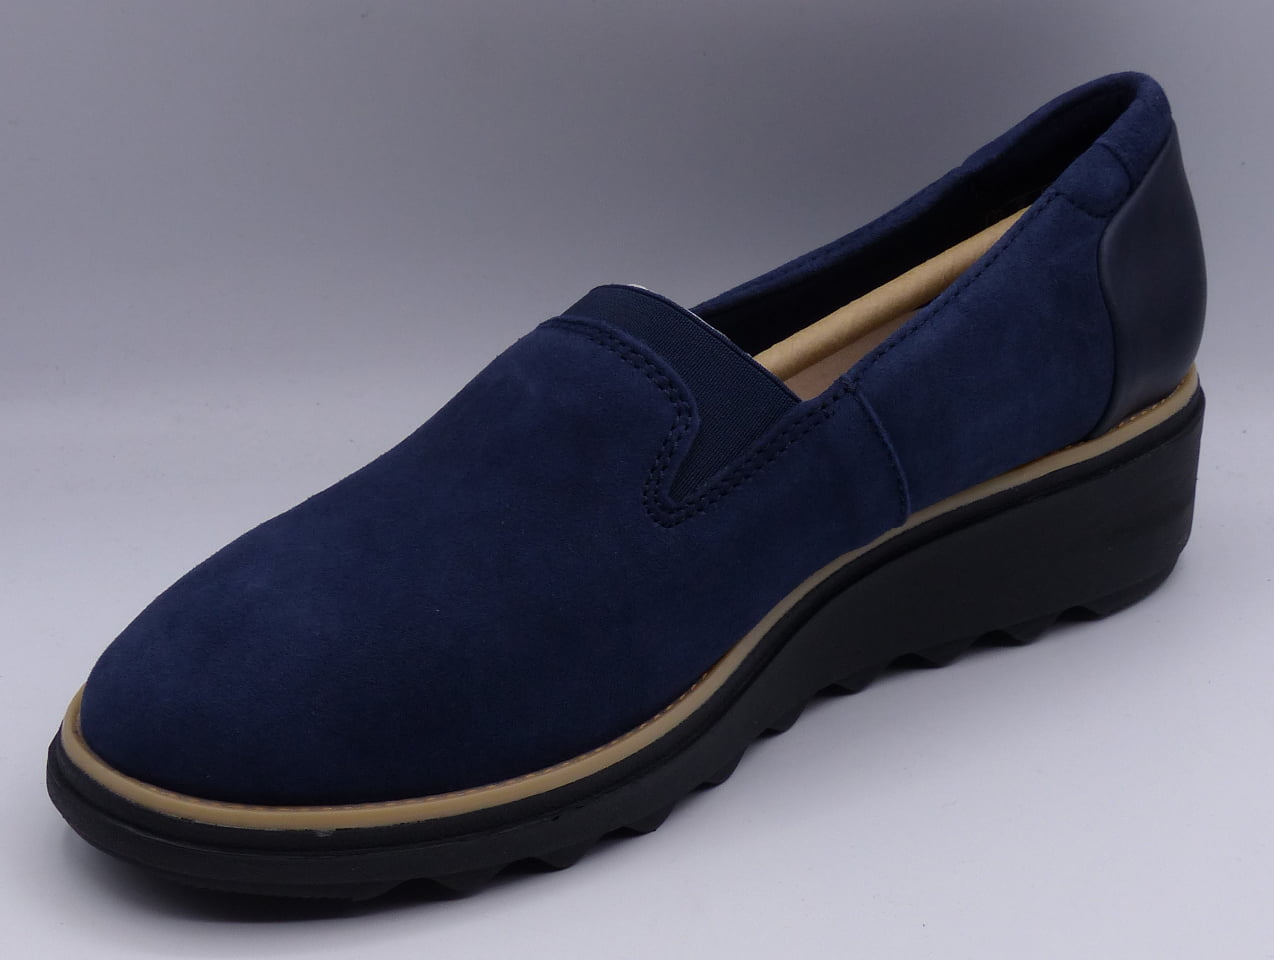 Clarks - CLARKS SHARON DOLLY NAVY SUEDE 